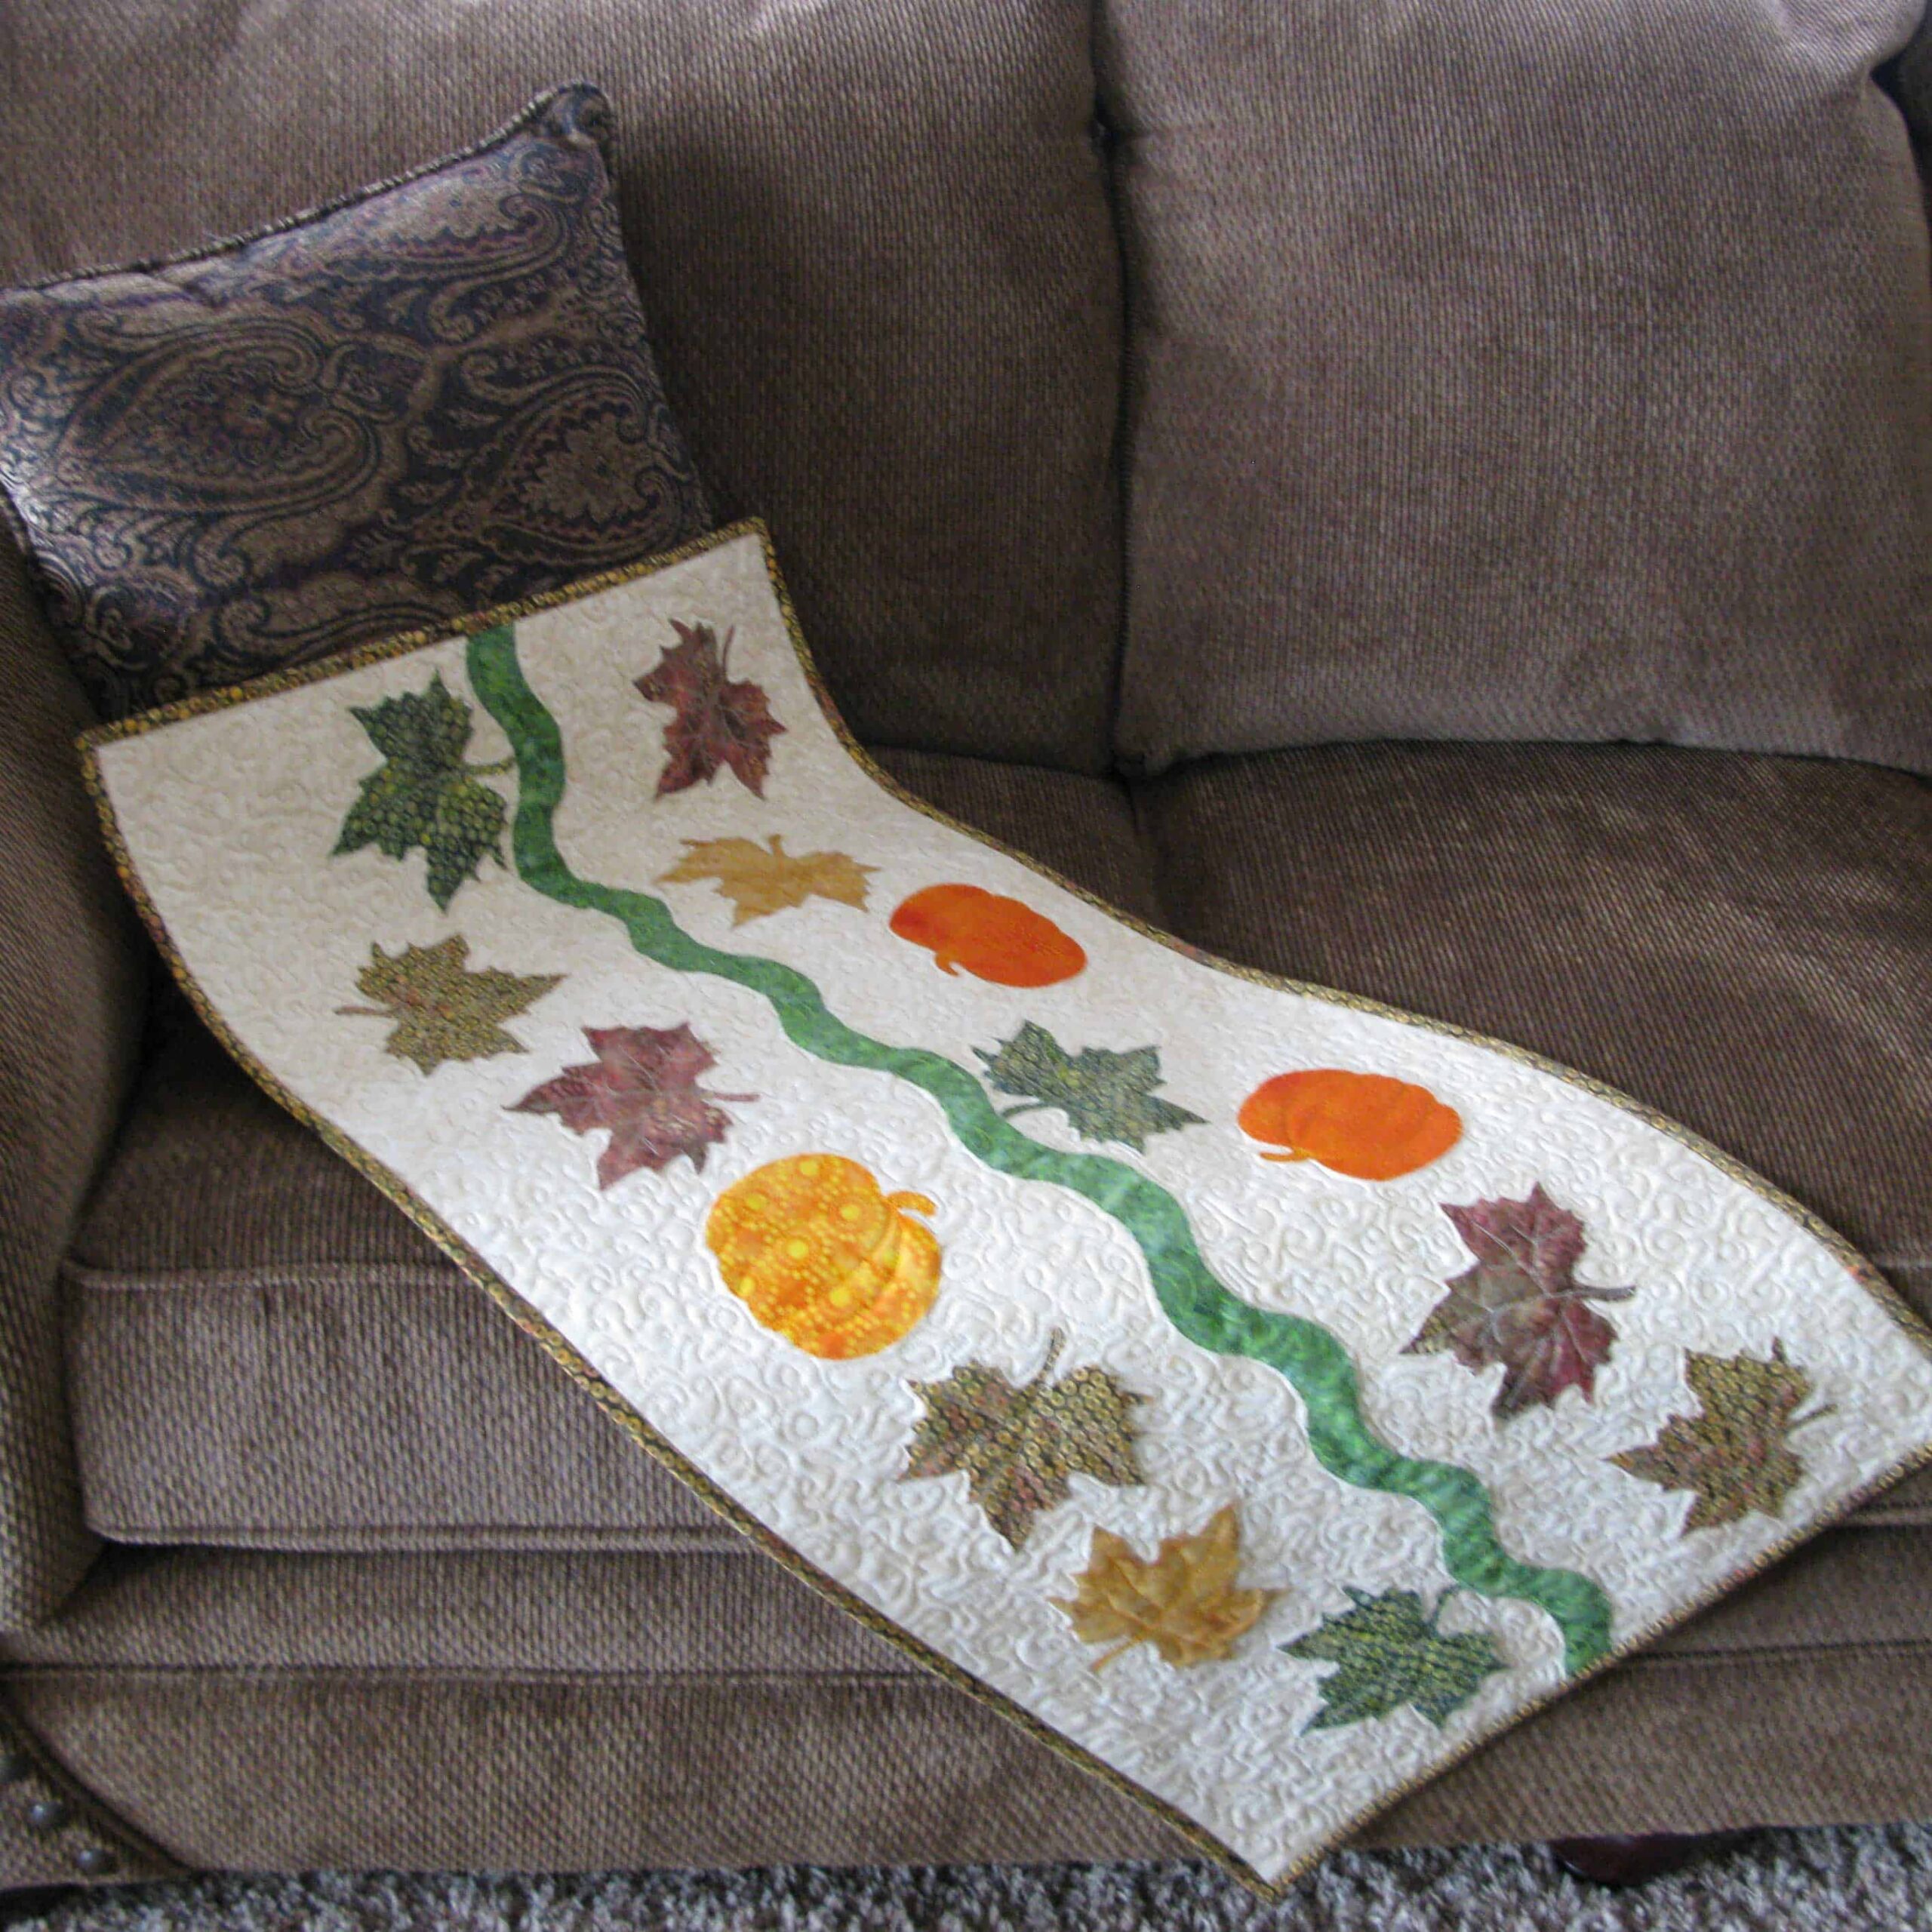 Autumn table runner on couch